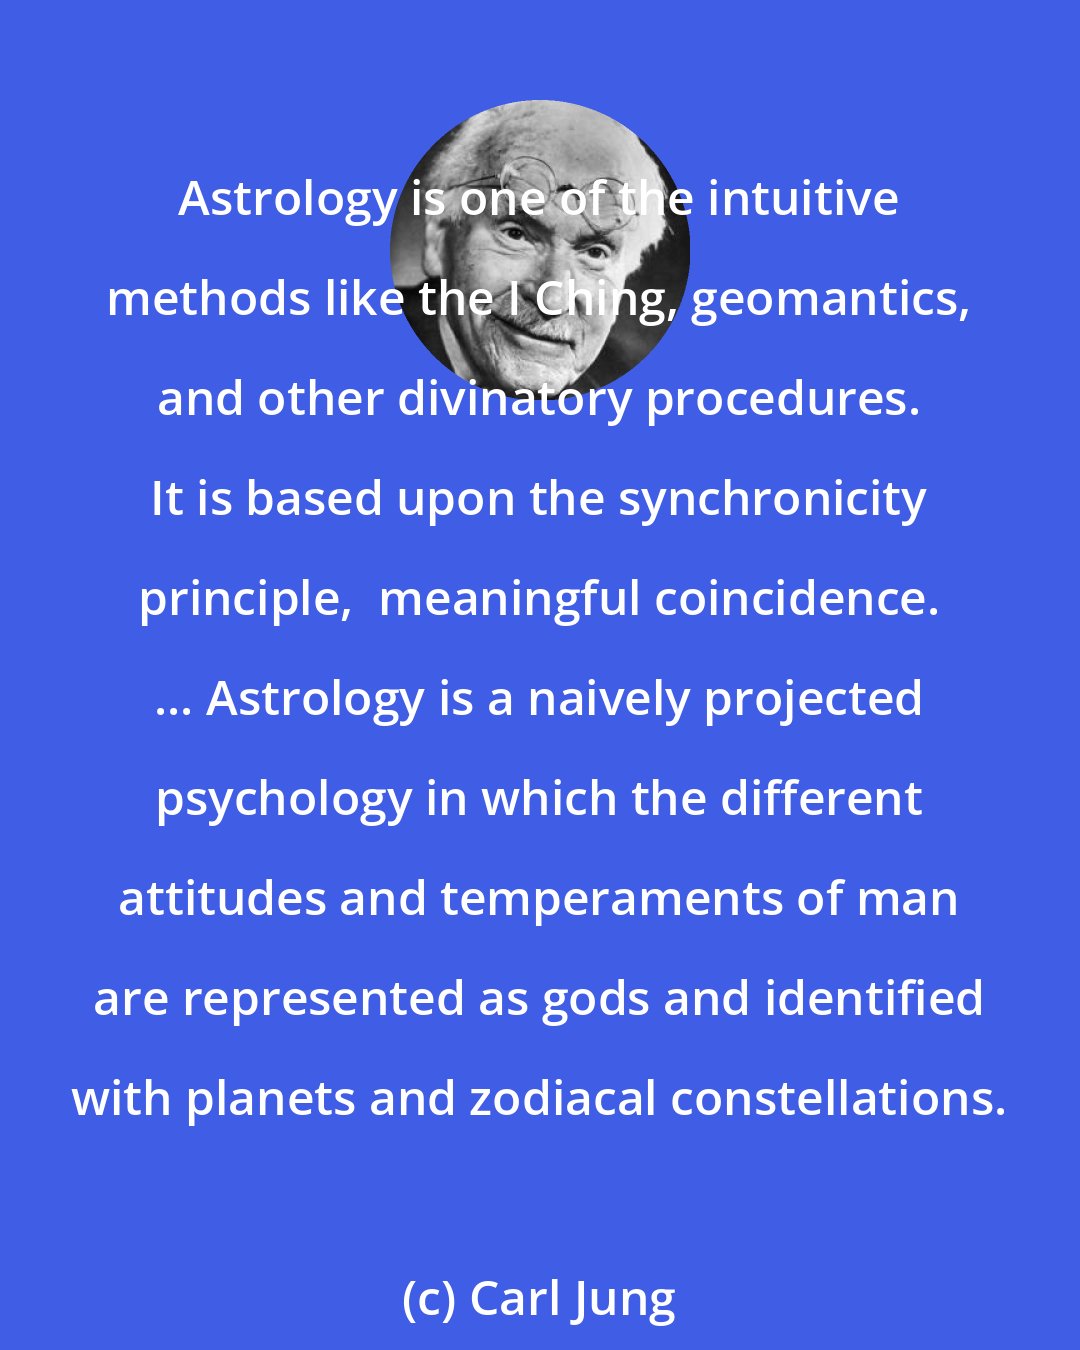 Carl Jung: Astrology is one of the intuitive methods like the I Ching, geomantics, and other divinatory procedures. It is based upon the synchronicity principle,  meaningful coincidence. ... Astrology is a naively projected psychology in which the different attitudes and temperaments of man are represented as gods and identified with planets and zodiacal constellations.